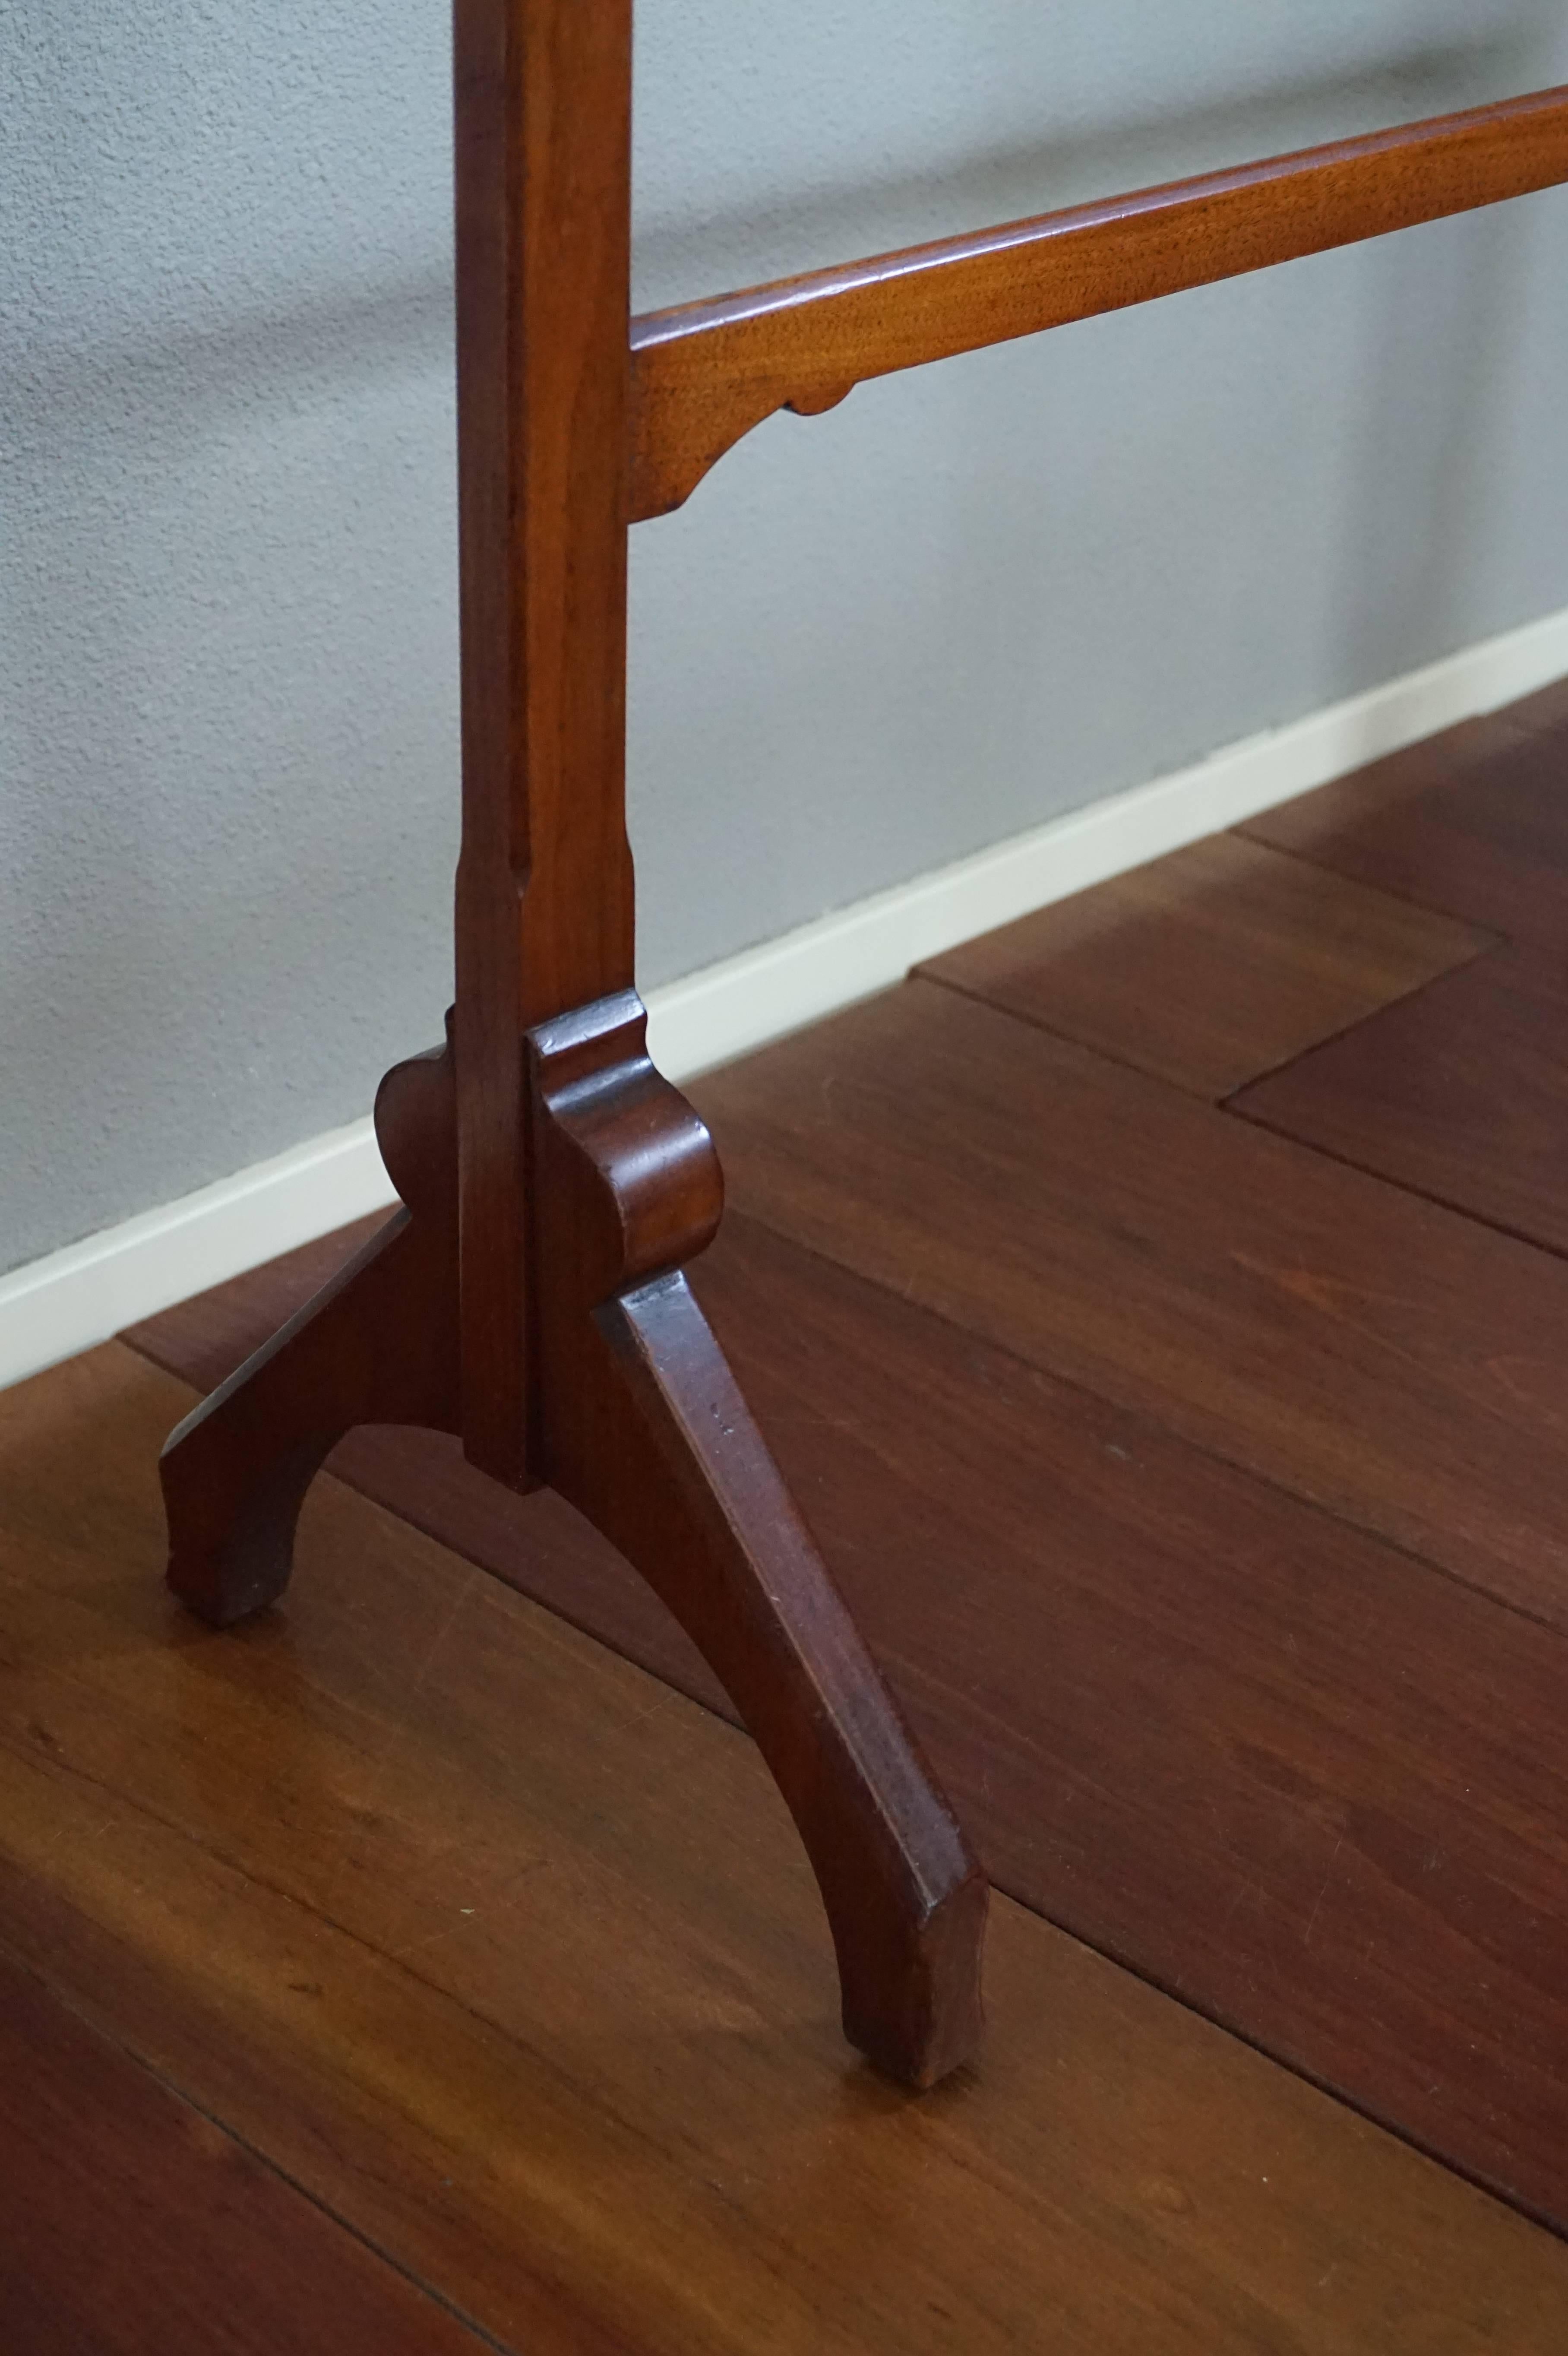 English Arts & Crafts Walnut Towel Rack by Gillow & Co Attributed to Bruce James Talbert